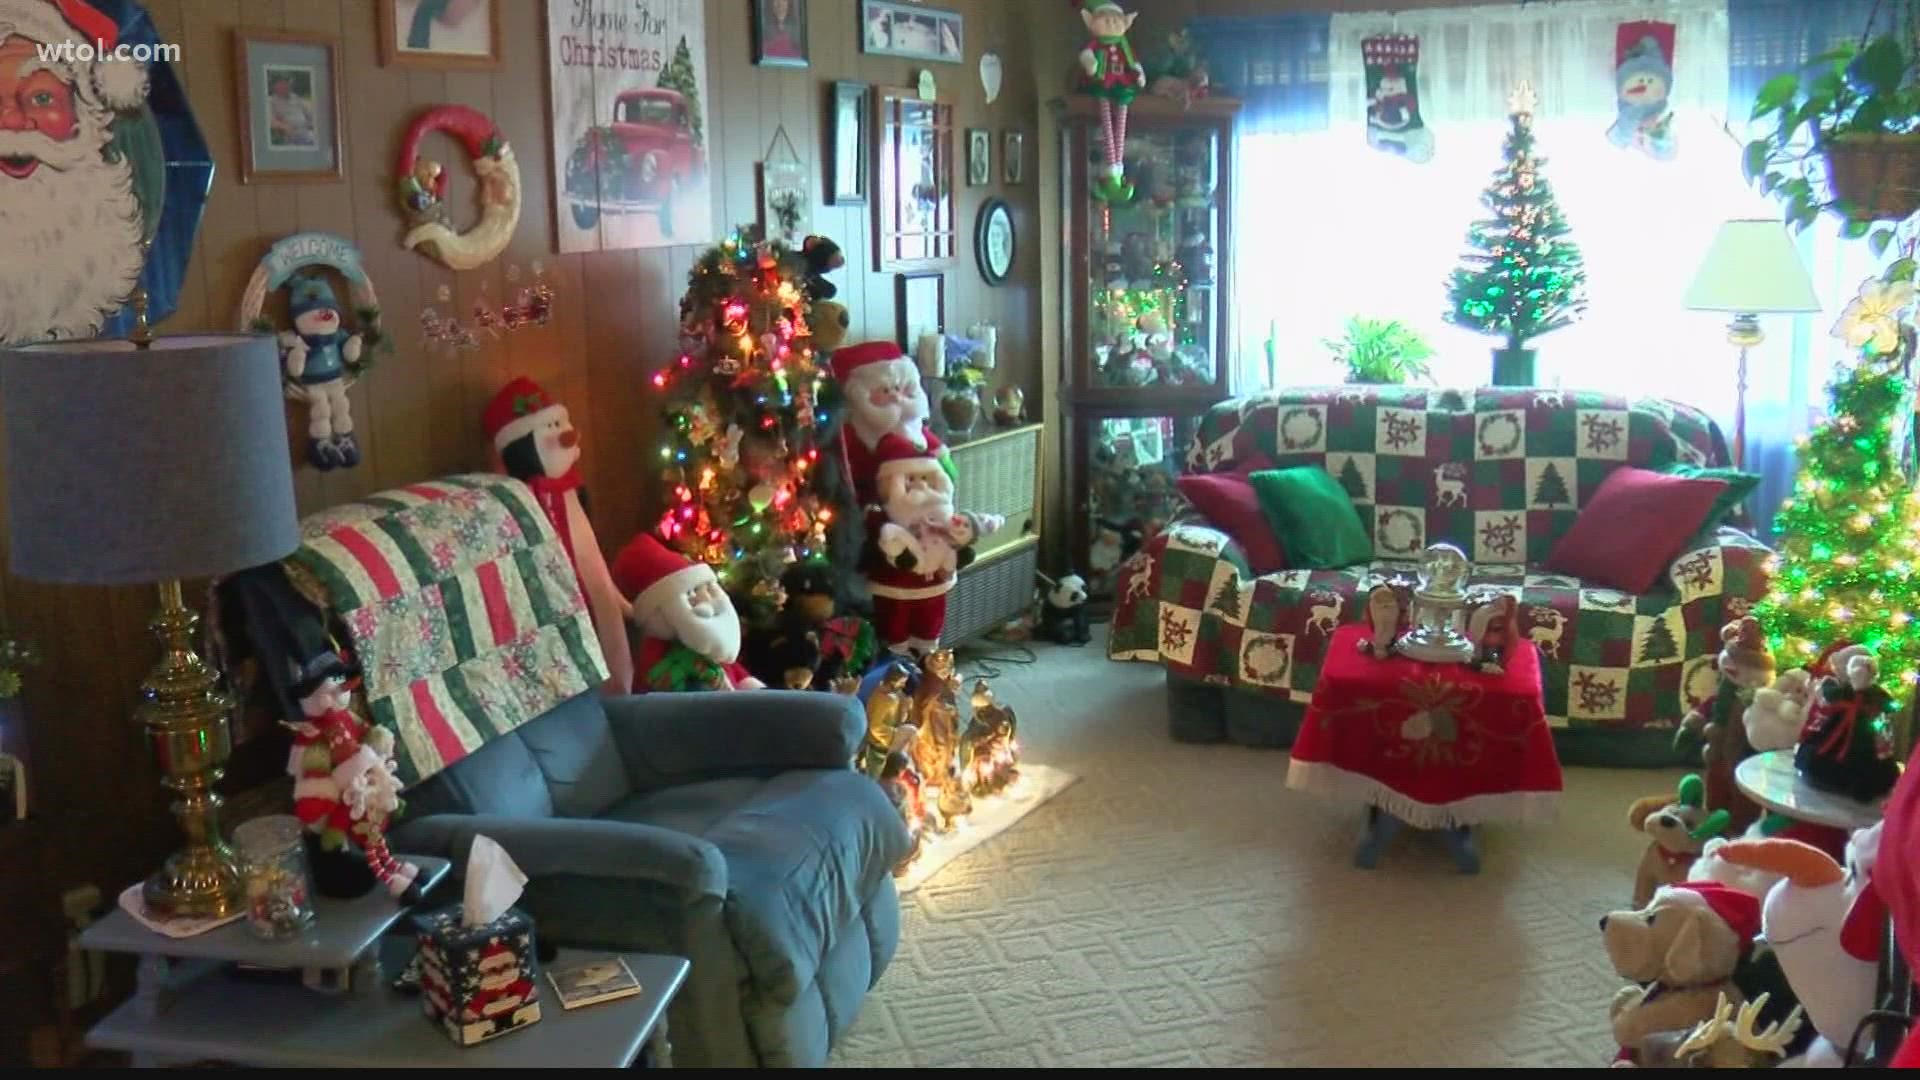 The Holland, Ohio woman's house is packed with Christmas-themed items.